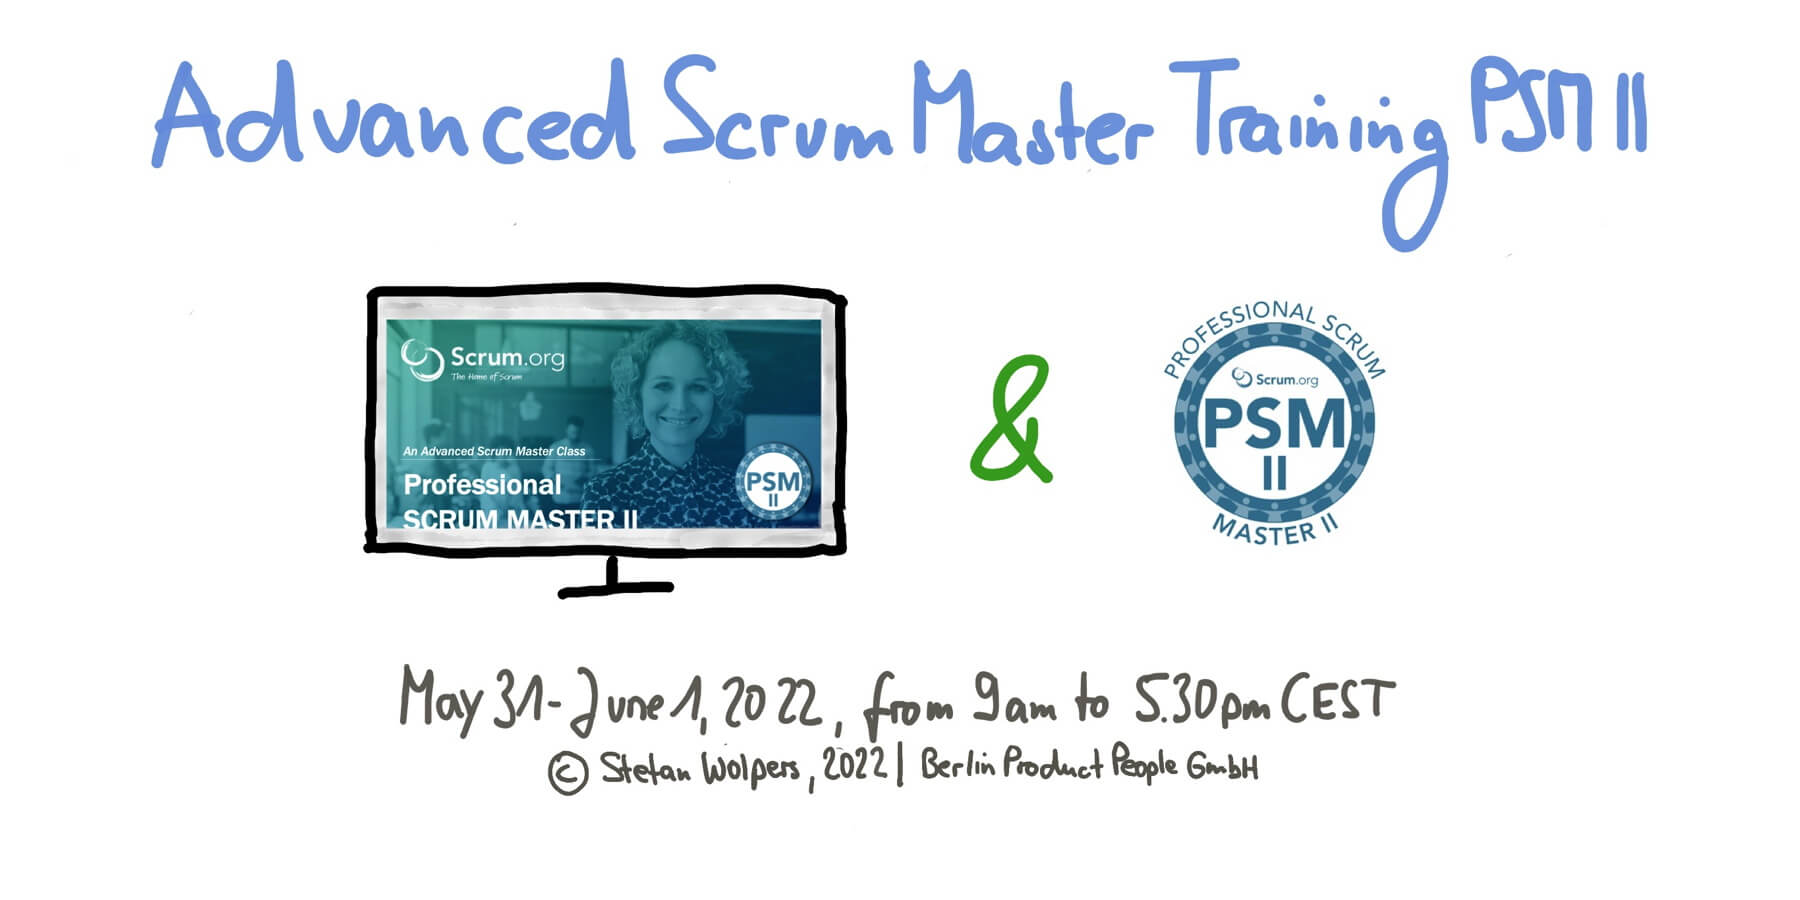 Advanced Professional Scrum Master Online Training w/ PSM II Certificate — May 31 to June 1, 2022 — Berlin Product People GmbH